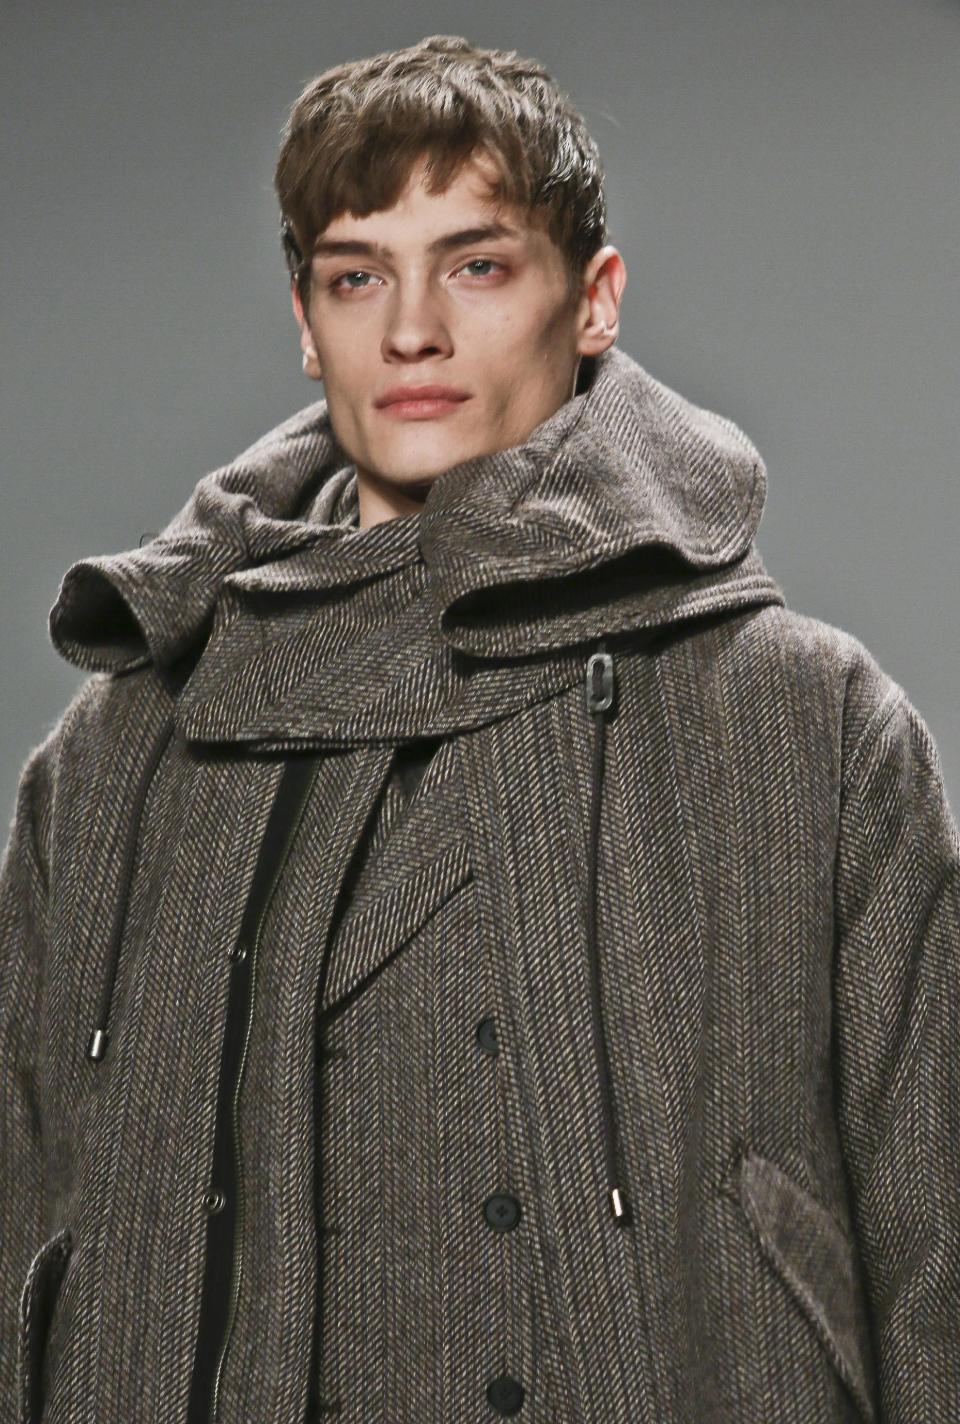 Fashion from the Fall 2013 collection of Richard Chai is modeled on Thursday, Feb. 7, 2013 in New York. (AP Photo/Bebeto Matthews)